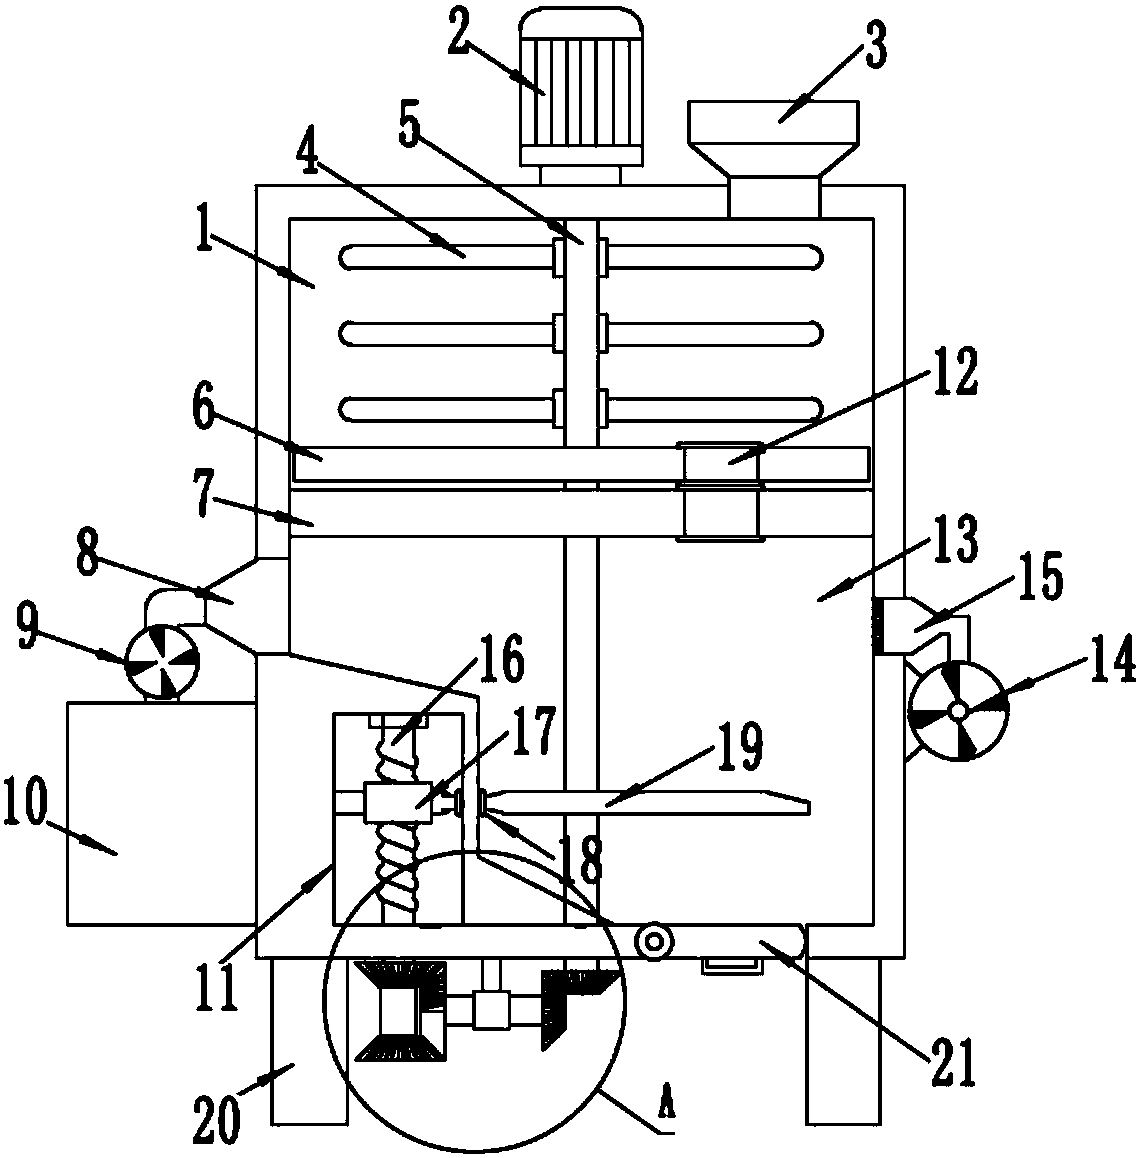 Hand lifting-copied cereal impurity removing device